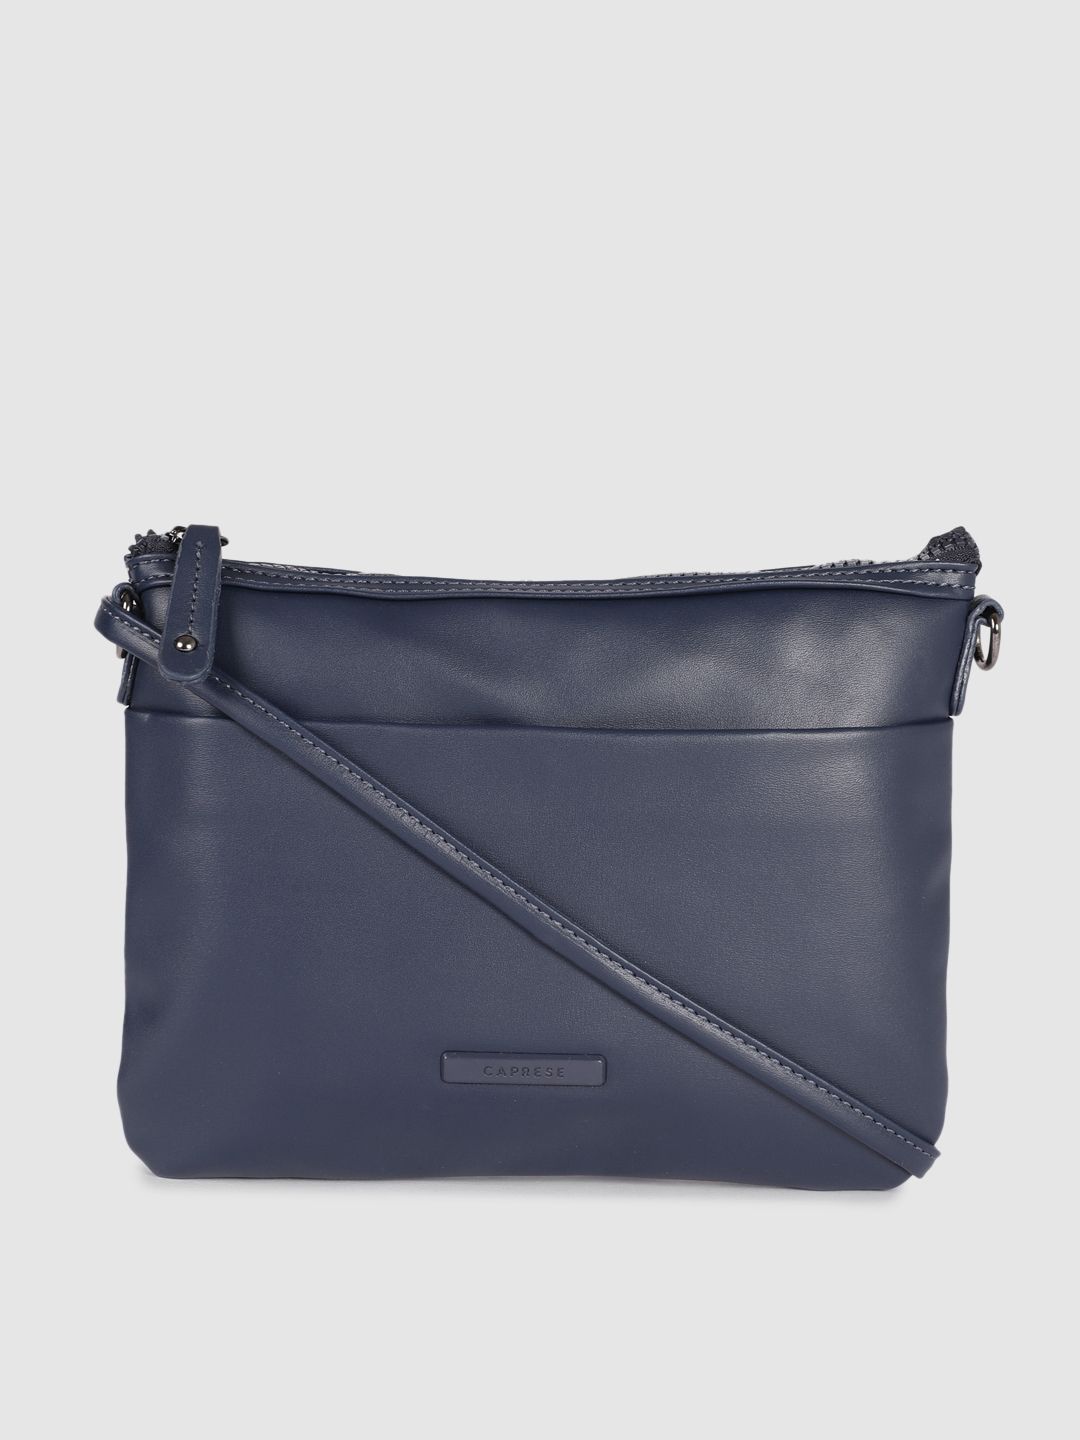 Caprese Navy Blue Solid Sling Bag Price in India